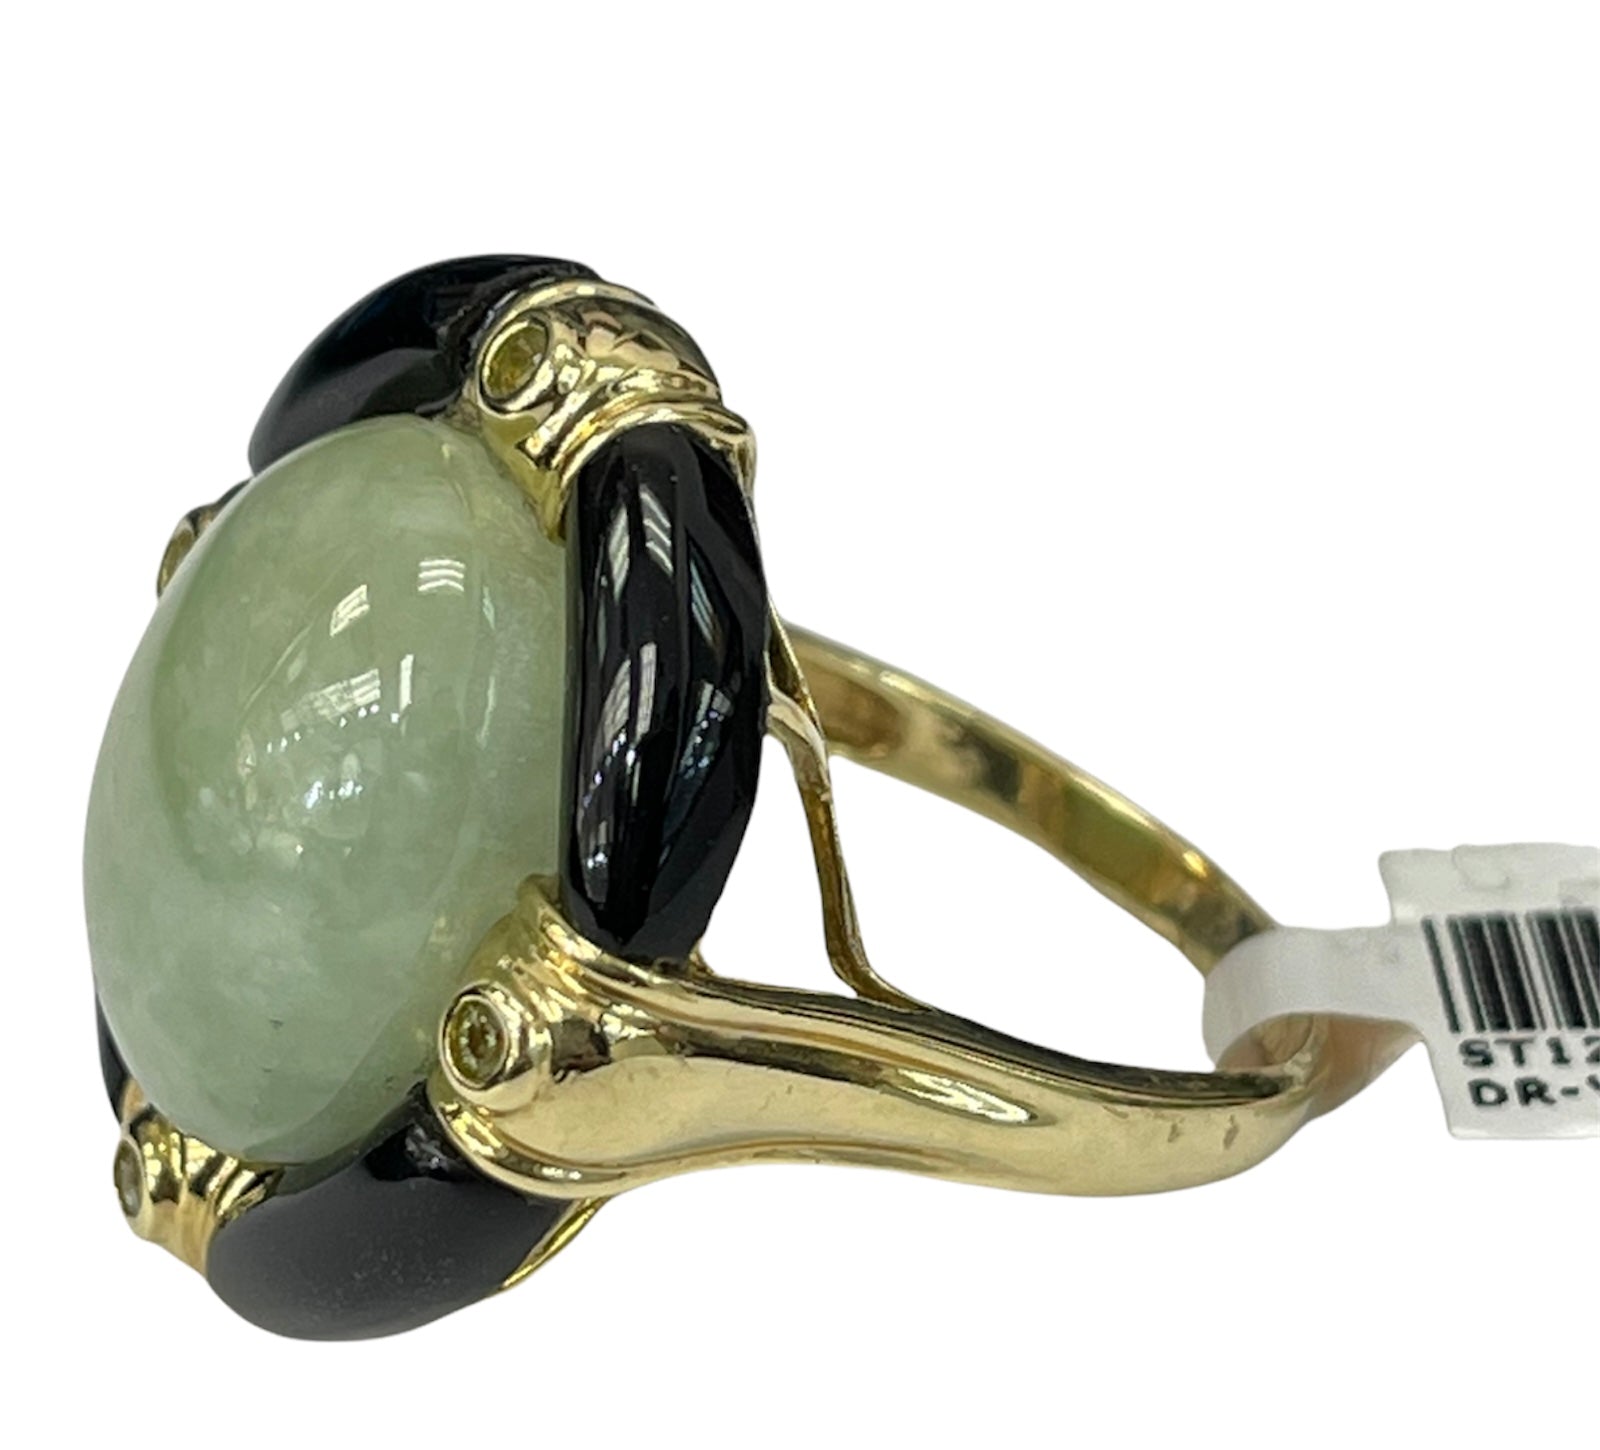 Jade Diamond Ring with Enamel Accents Yellow Gold